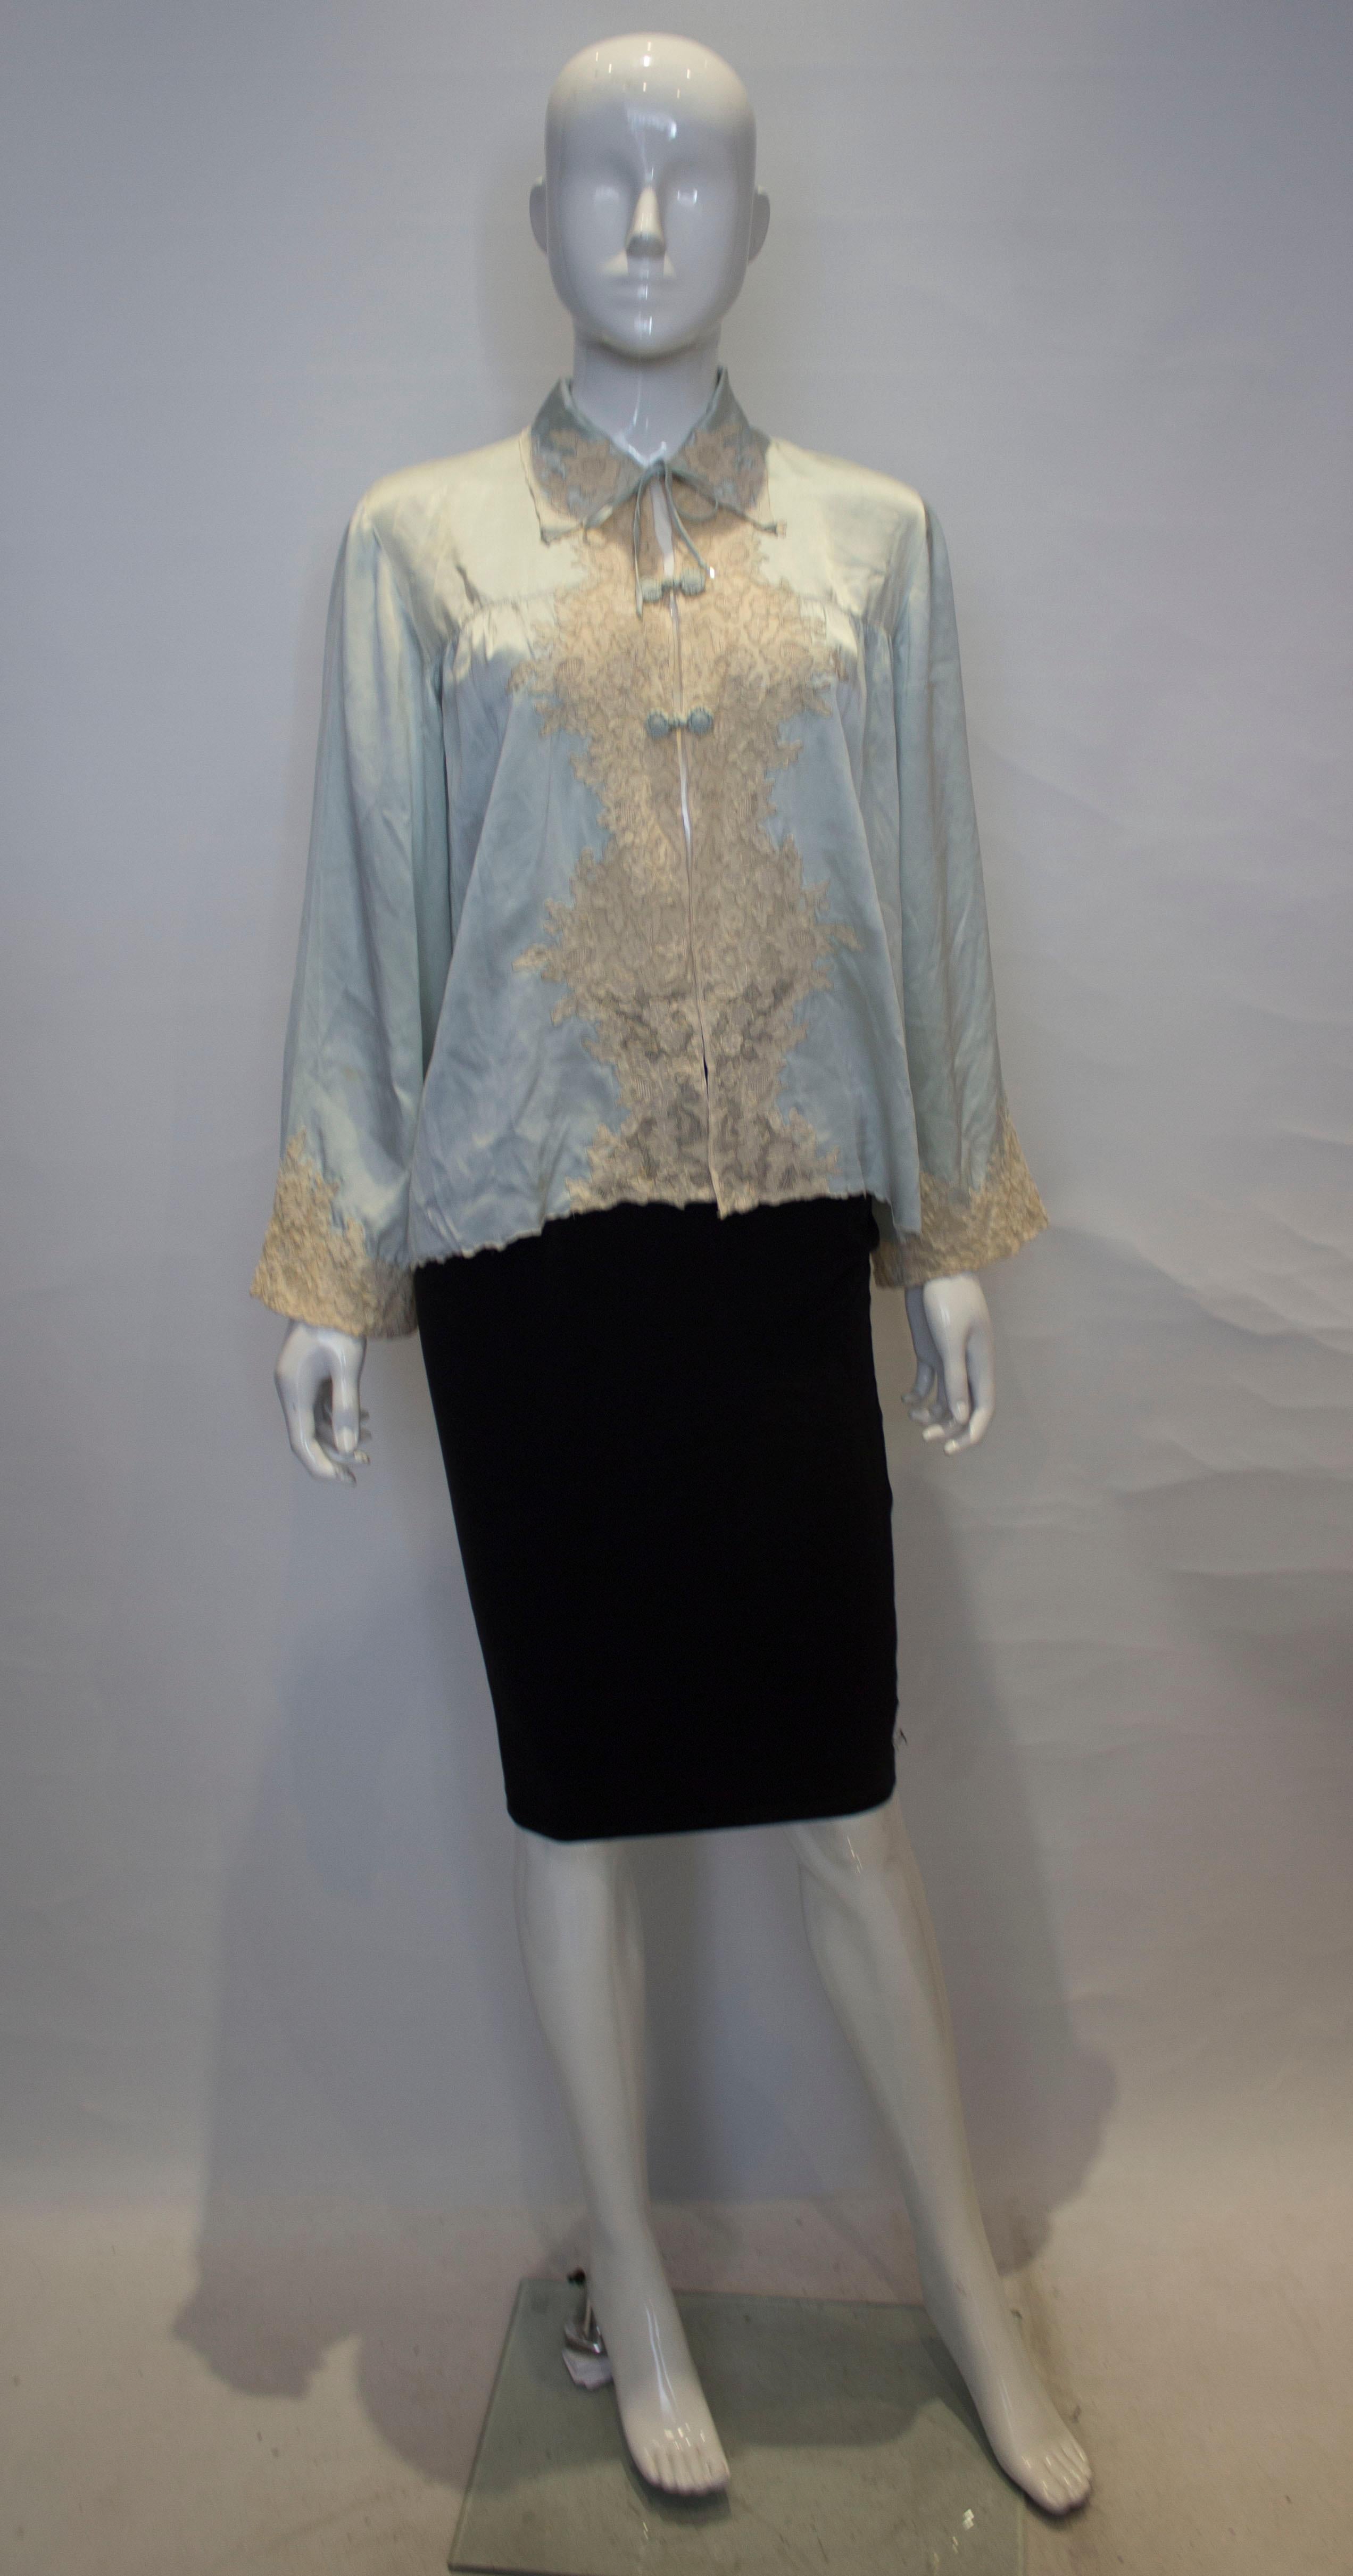 A luxurious vintage silk satin bed jacket with lace detail in a pretty ice blue colour. The jacket has a tie opening at the top and two toggle on the front. There is wonderful lace detail on the front and cuffs, with pleats from the yoke and a